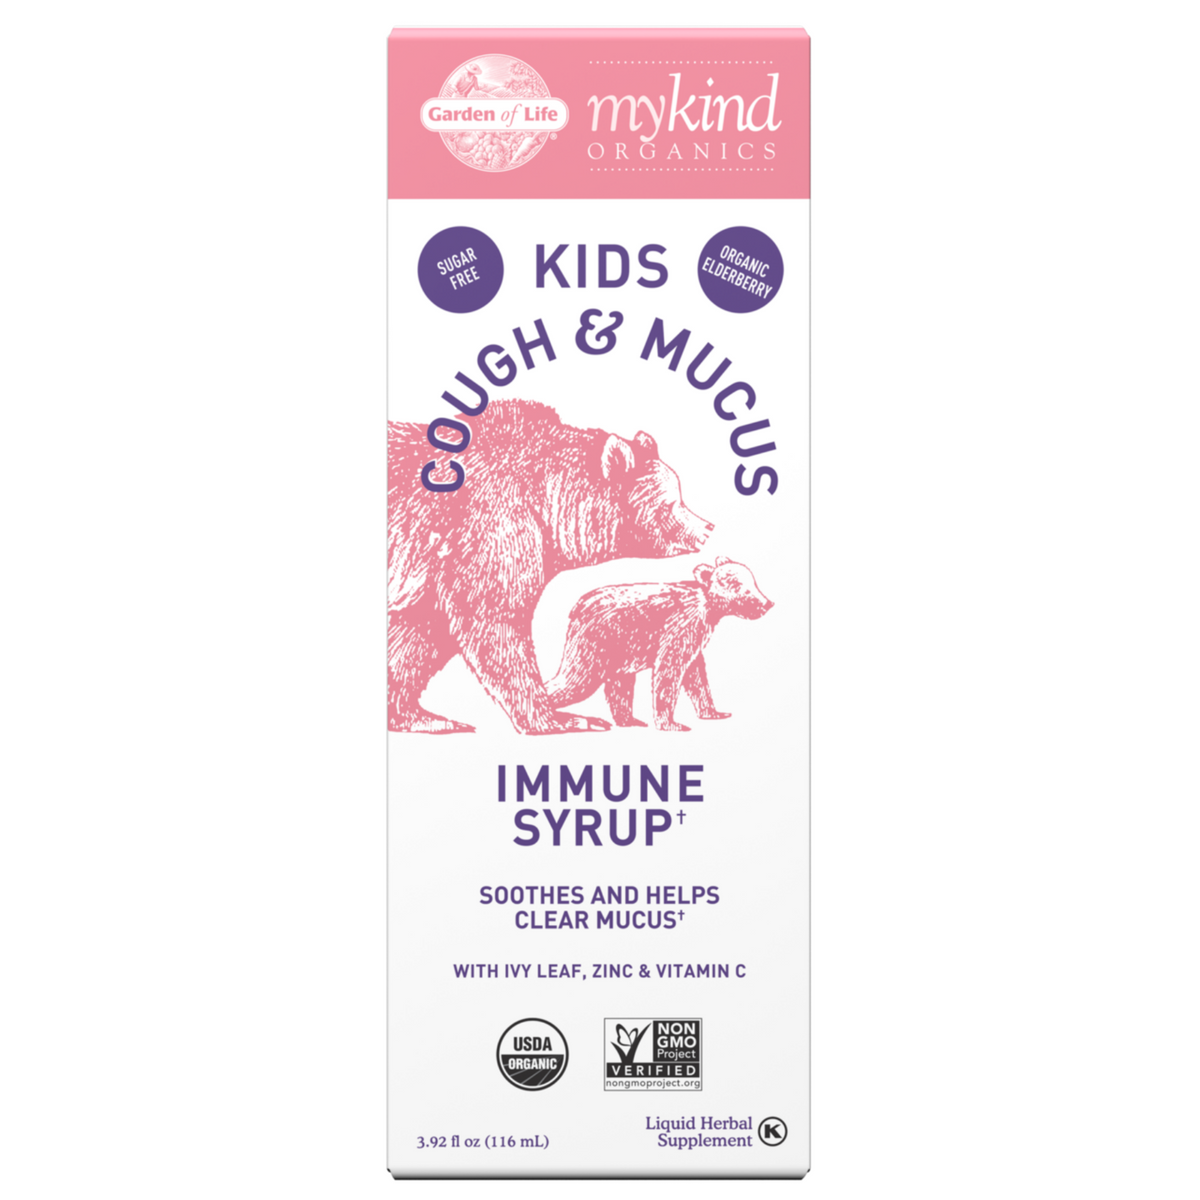 Primary Image of Kids Cough + Mucus Immune Syrup